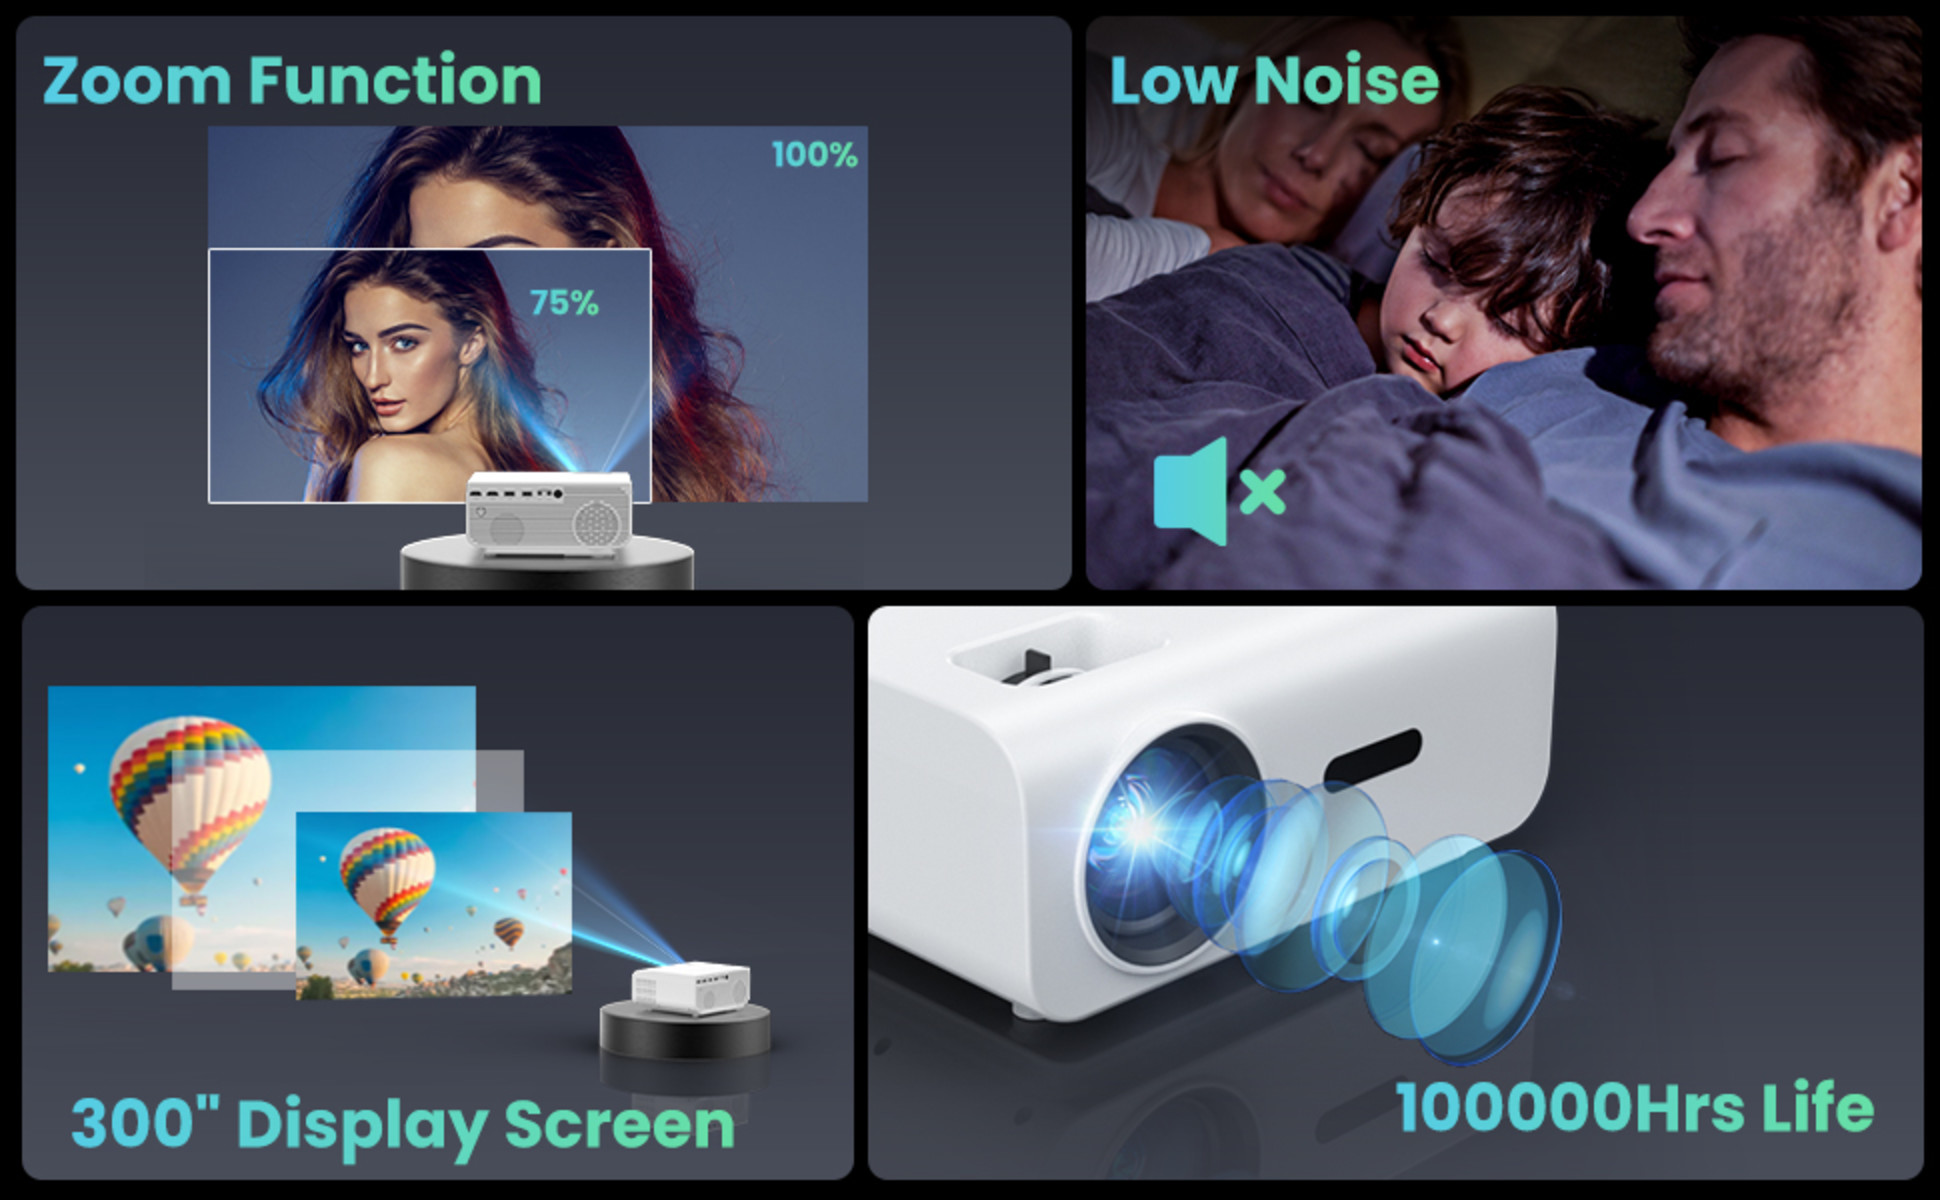 Proyector Groview , 15000lux 490ANSI Nativo 1080P WiFi Bluetooth Proyector,  300'' Video Proyector, Soporta 4K & Zoom, 5G Sync, Compatible con HDMI USB,  AV, Smartphone, iPad, Laptop, DVD, TV Stick, PS5